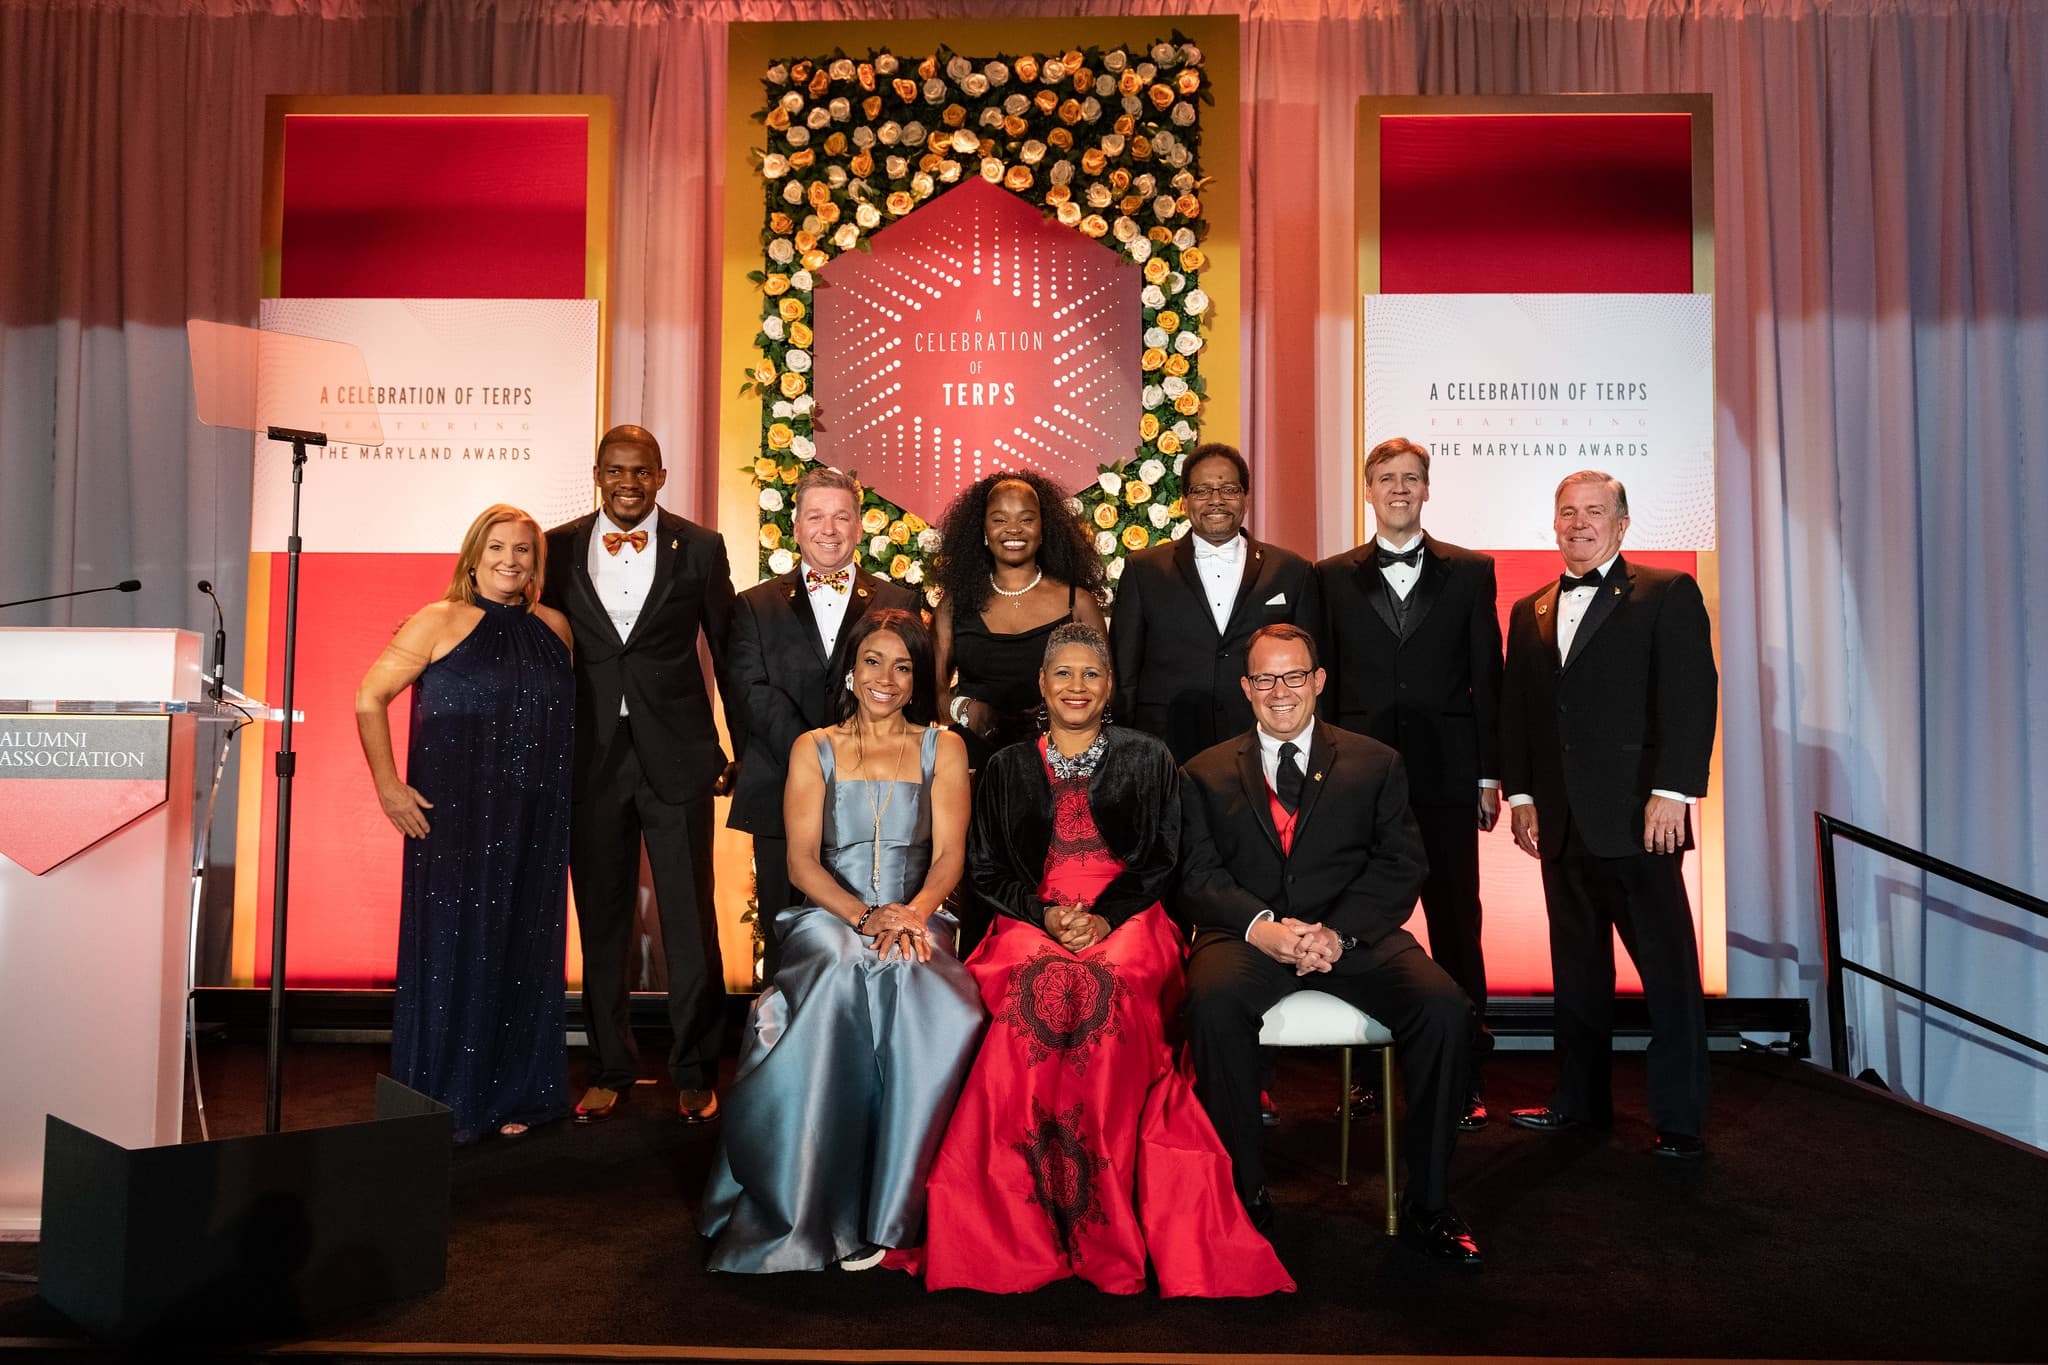 2022 Awardees standing together in their best black-tie attire after receiving their respective awards as part of A Celebration of Terps.